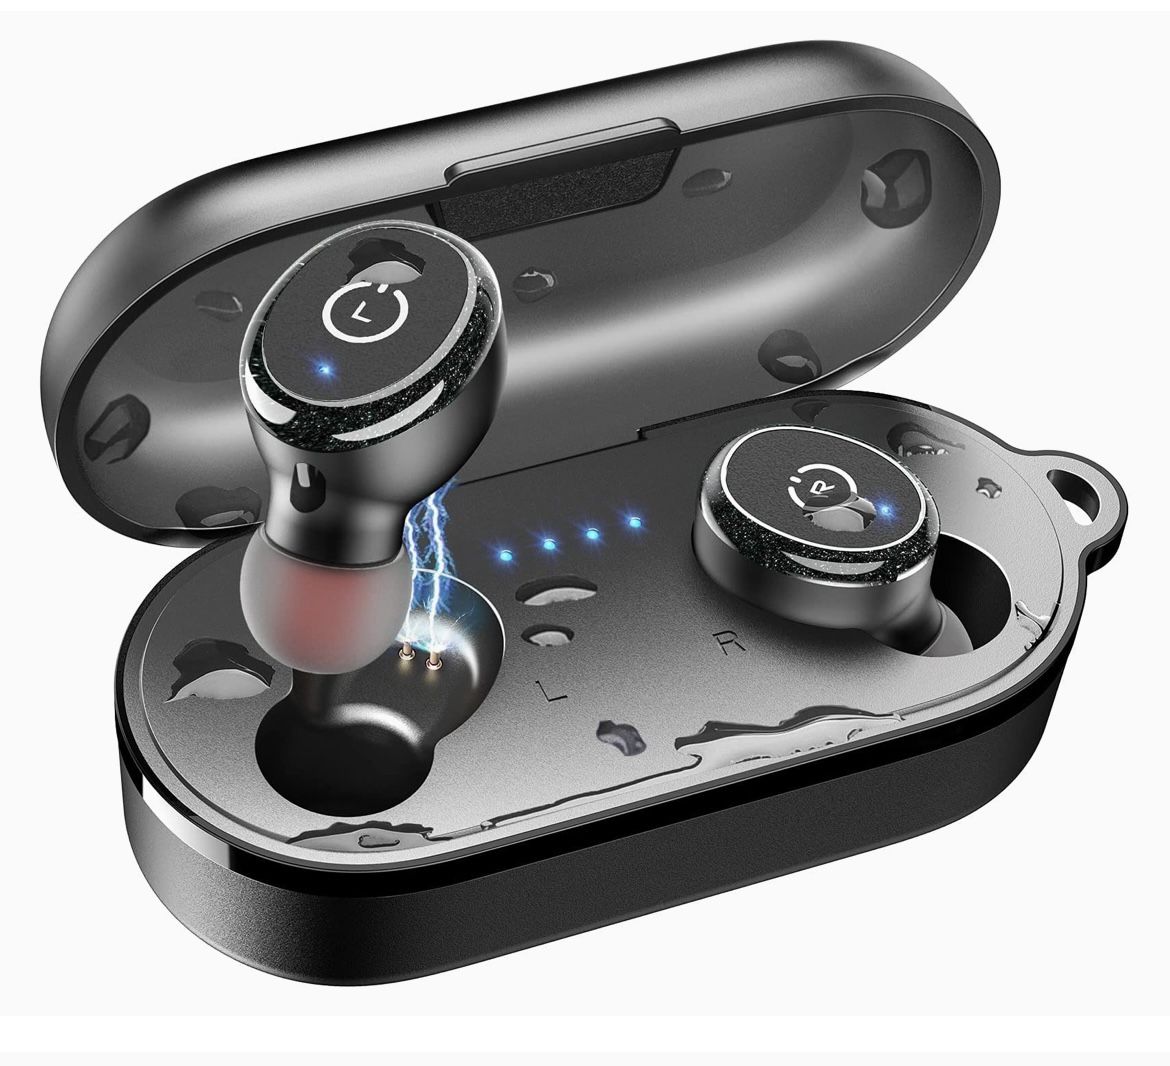 TOZO T10 Bluetooth 5.0 Wireless Earbuds with Wireless Charging Case IPX8 Waterproof Stereo Headphones in Ear Built in Mic Headset Premium Sound with D